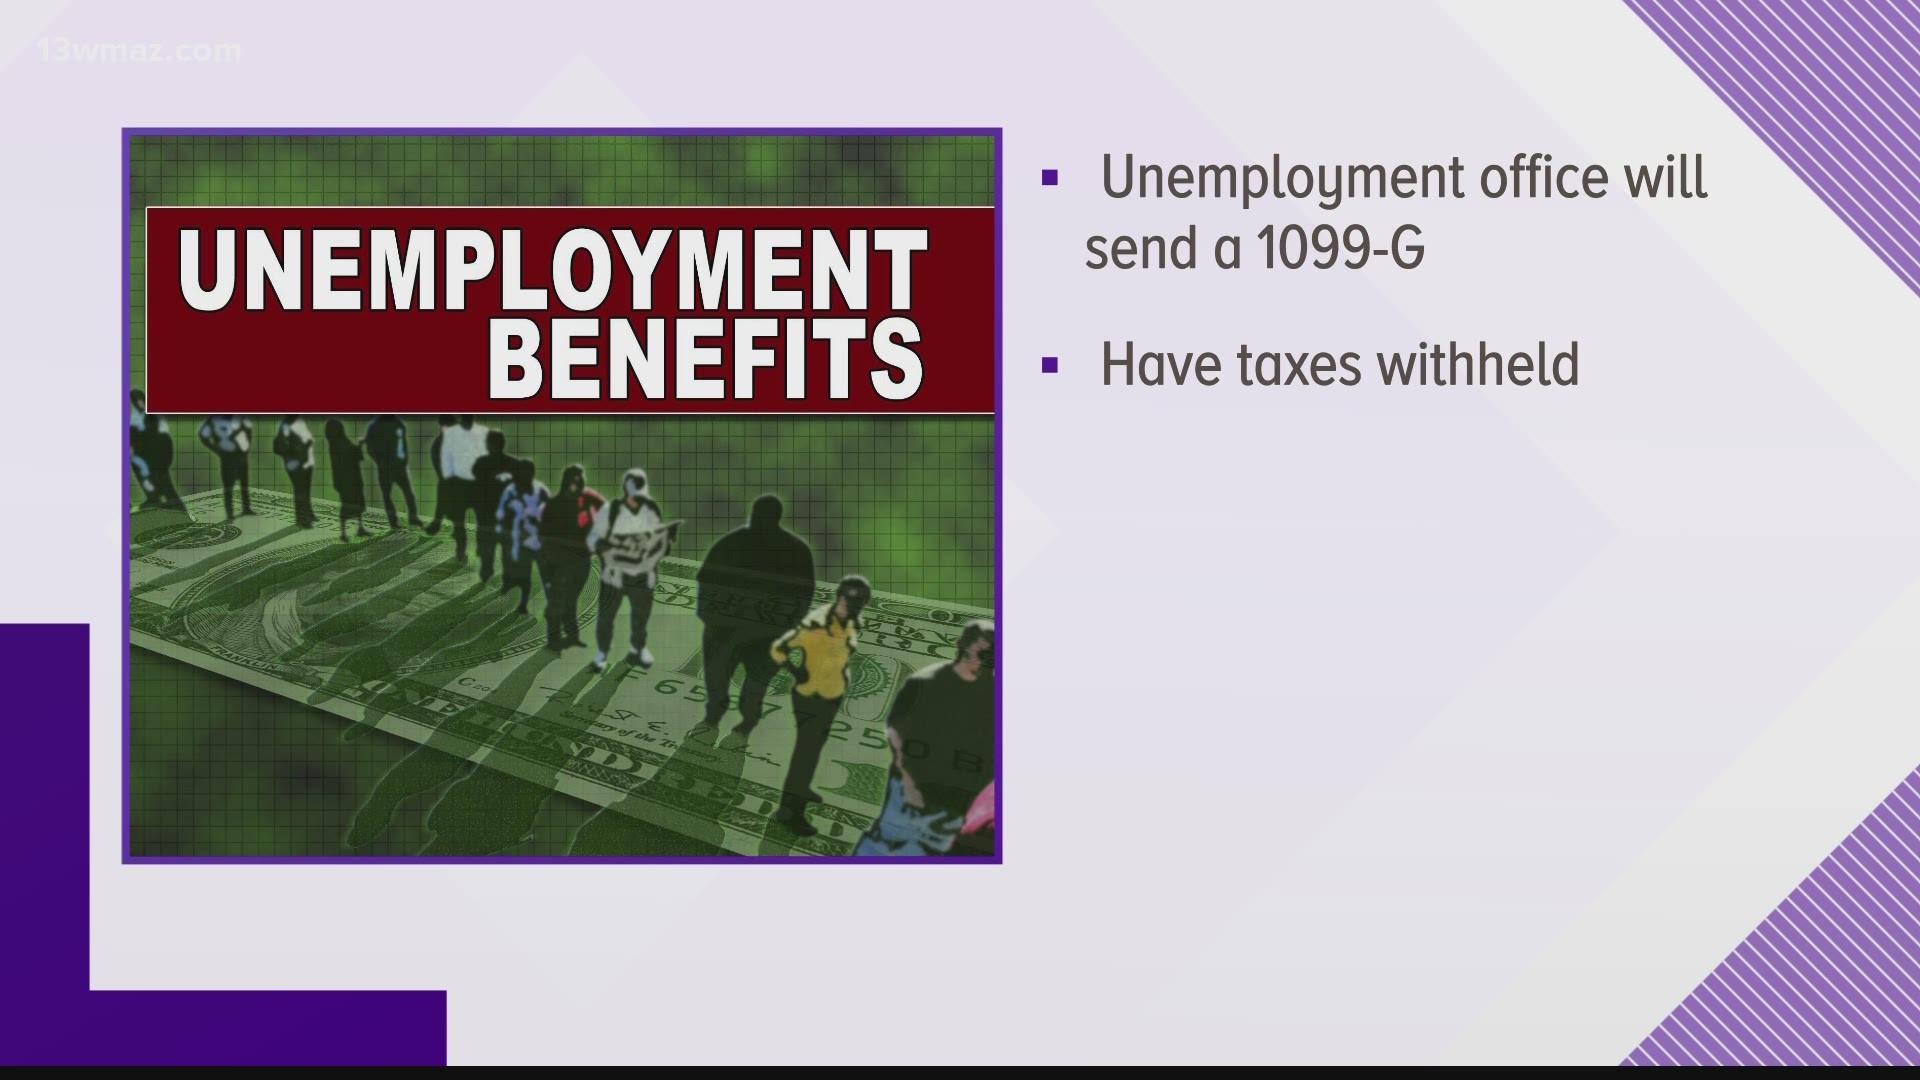 Americans could owe $50 billion in taxes on unemployment benefits alone. If this is your situation, what are your options?